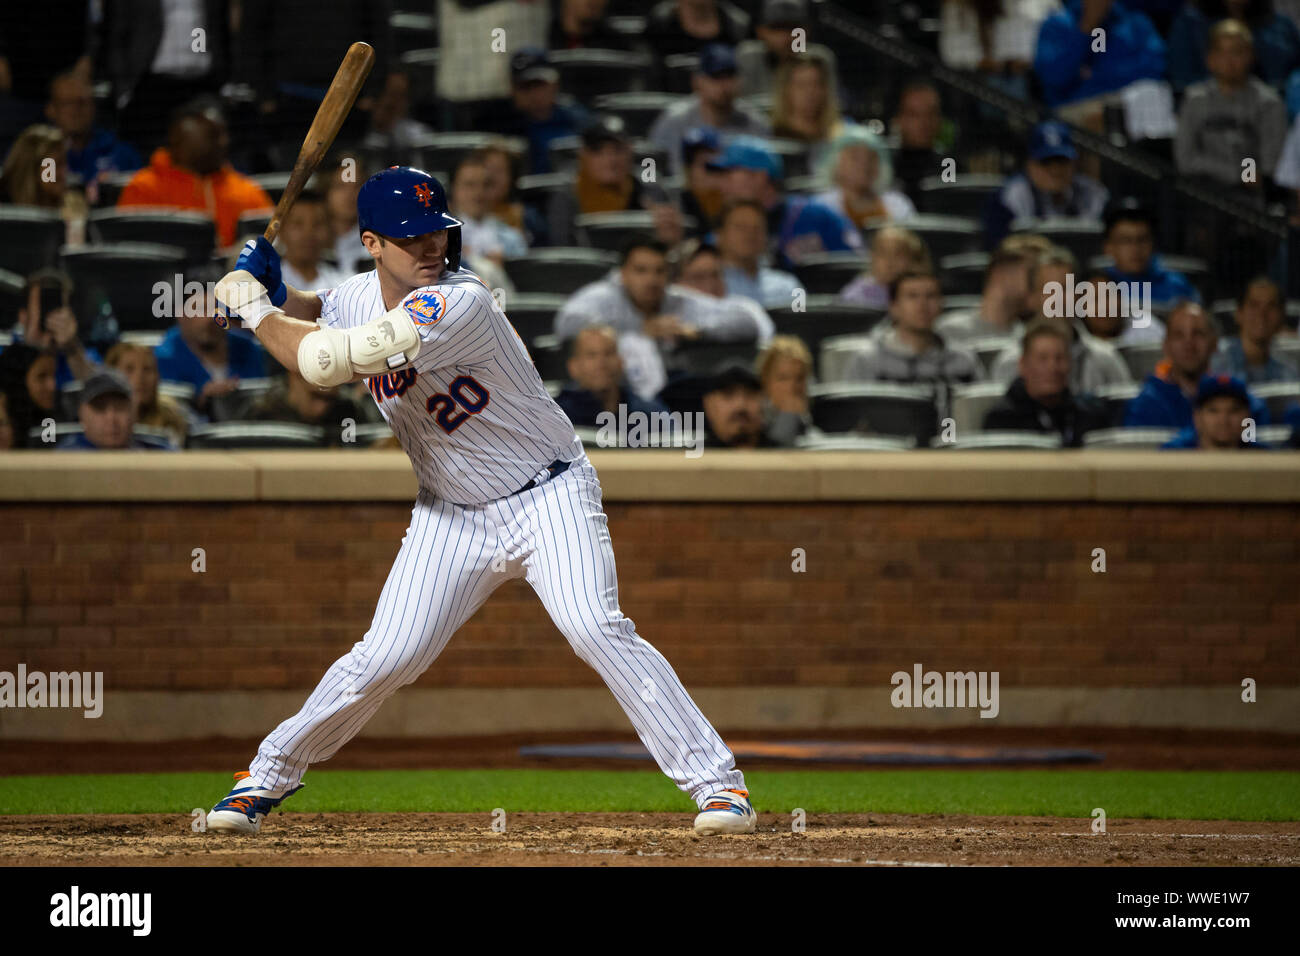 Queens, New York, USA. 13th Sep, 2019. New York Mets first baseman Pete  Alonso (20) takes a swing during the game between The New York Mets and The  Los Angeles Dodgers at